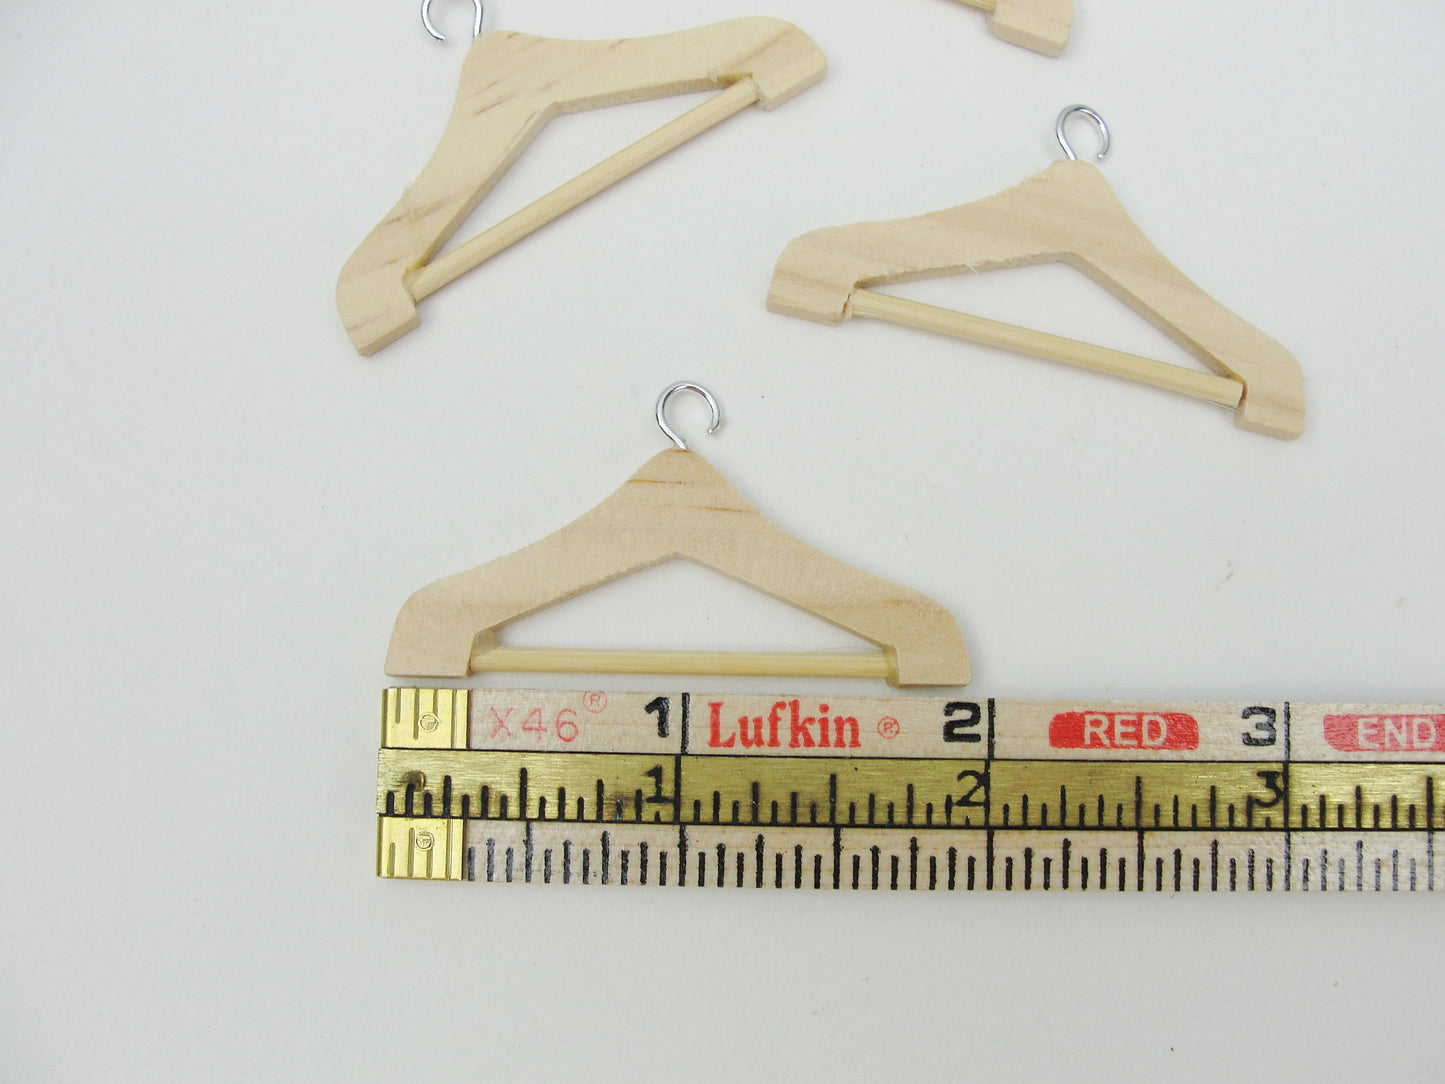 Dollhouse miniature wood clothes hangers - Miniatures - Craft Supply House